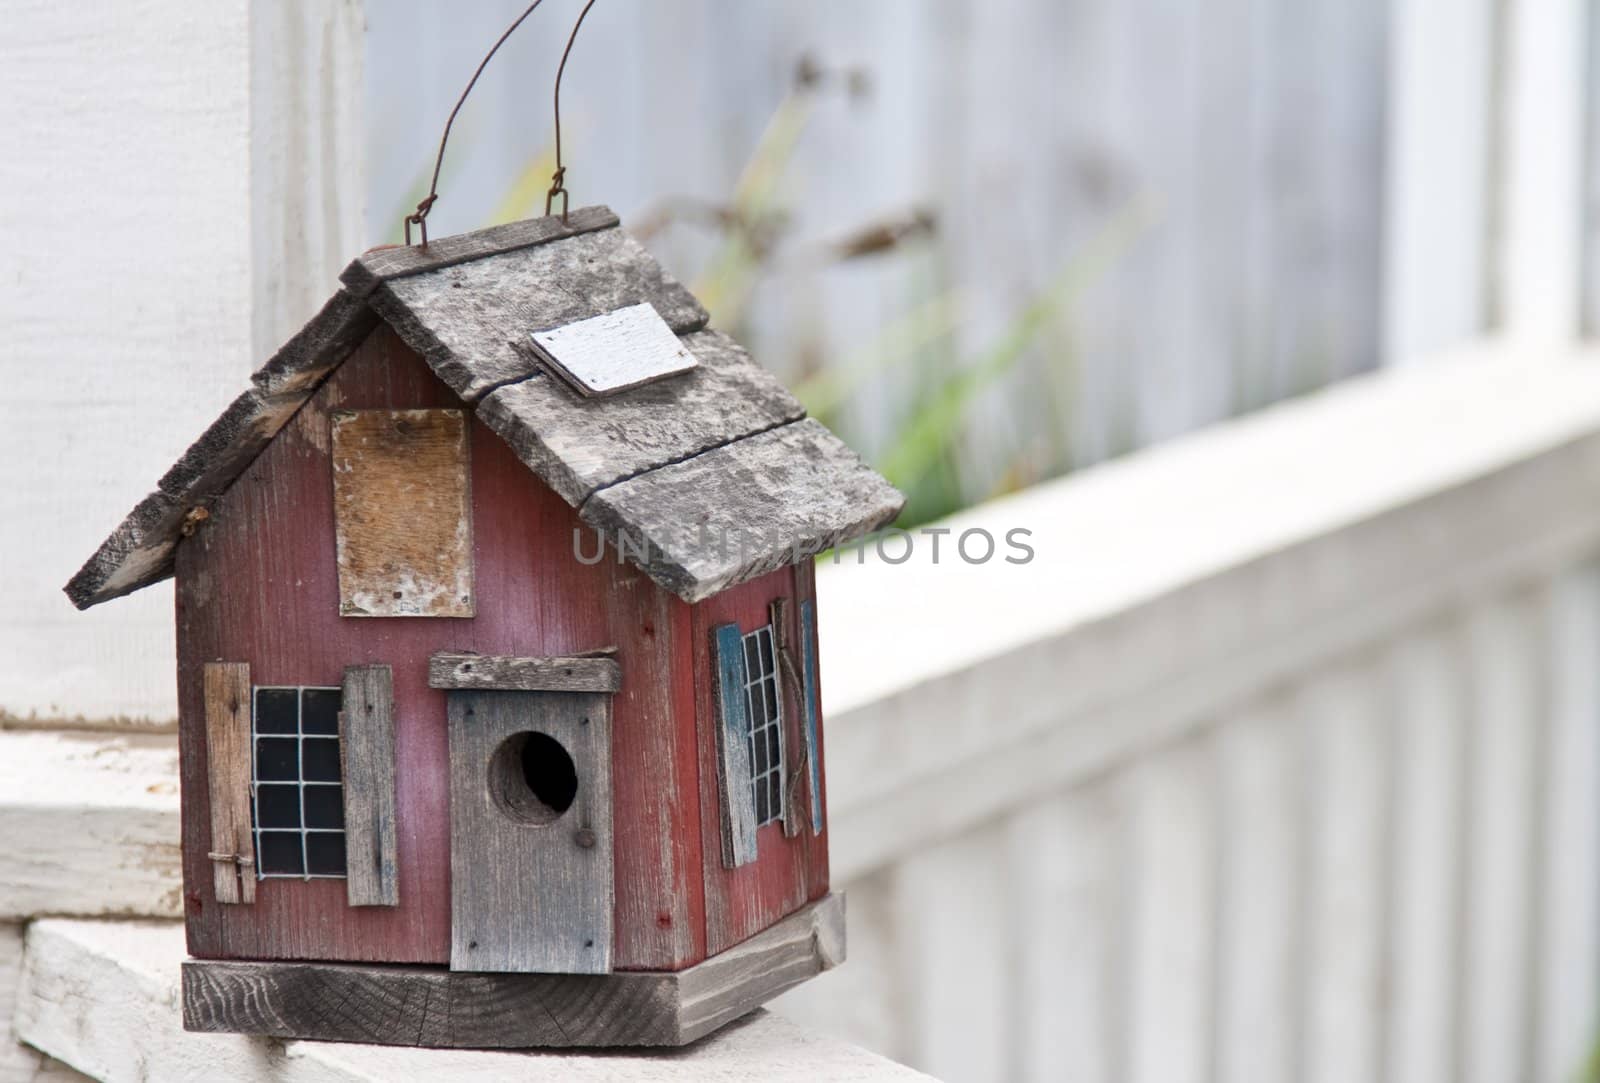 Country folk style bird house on front porch railing